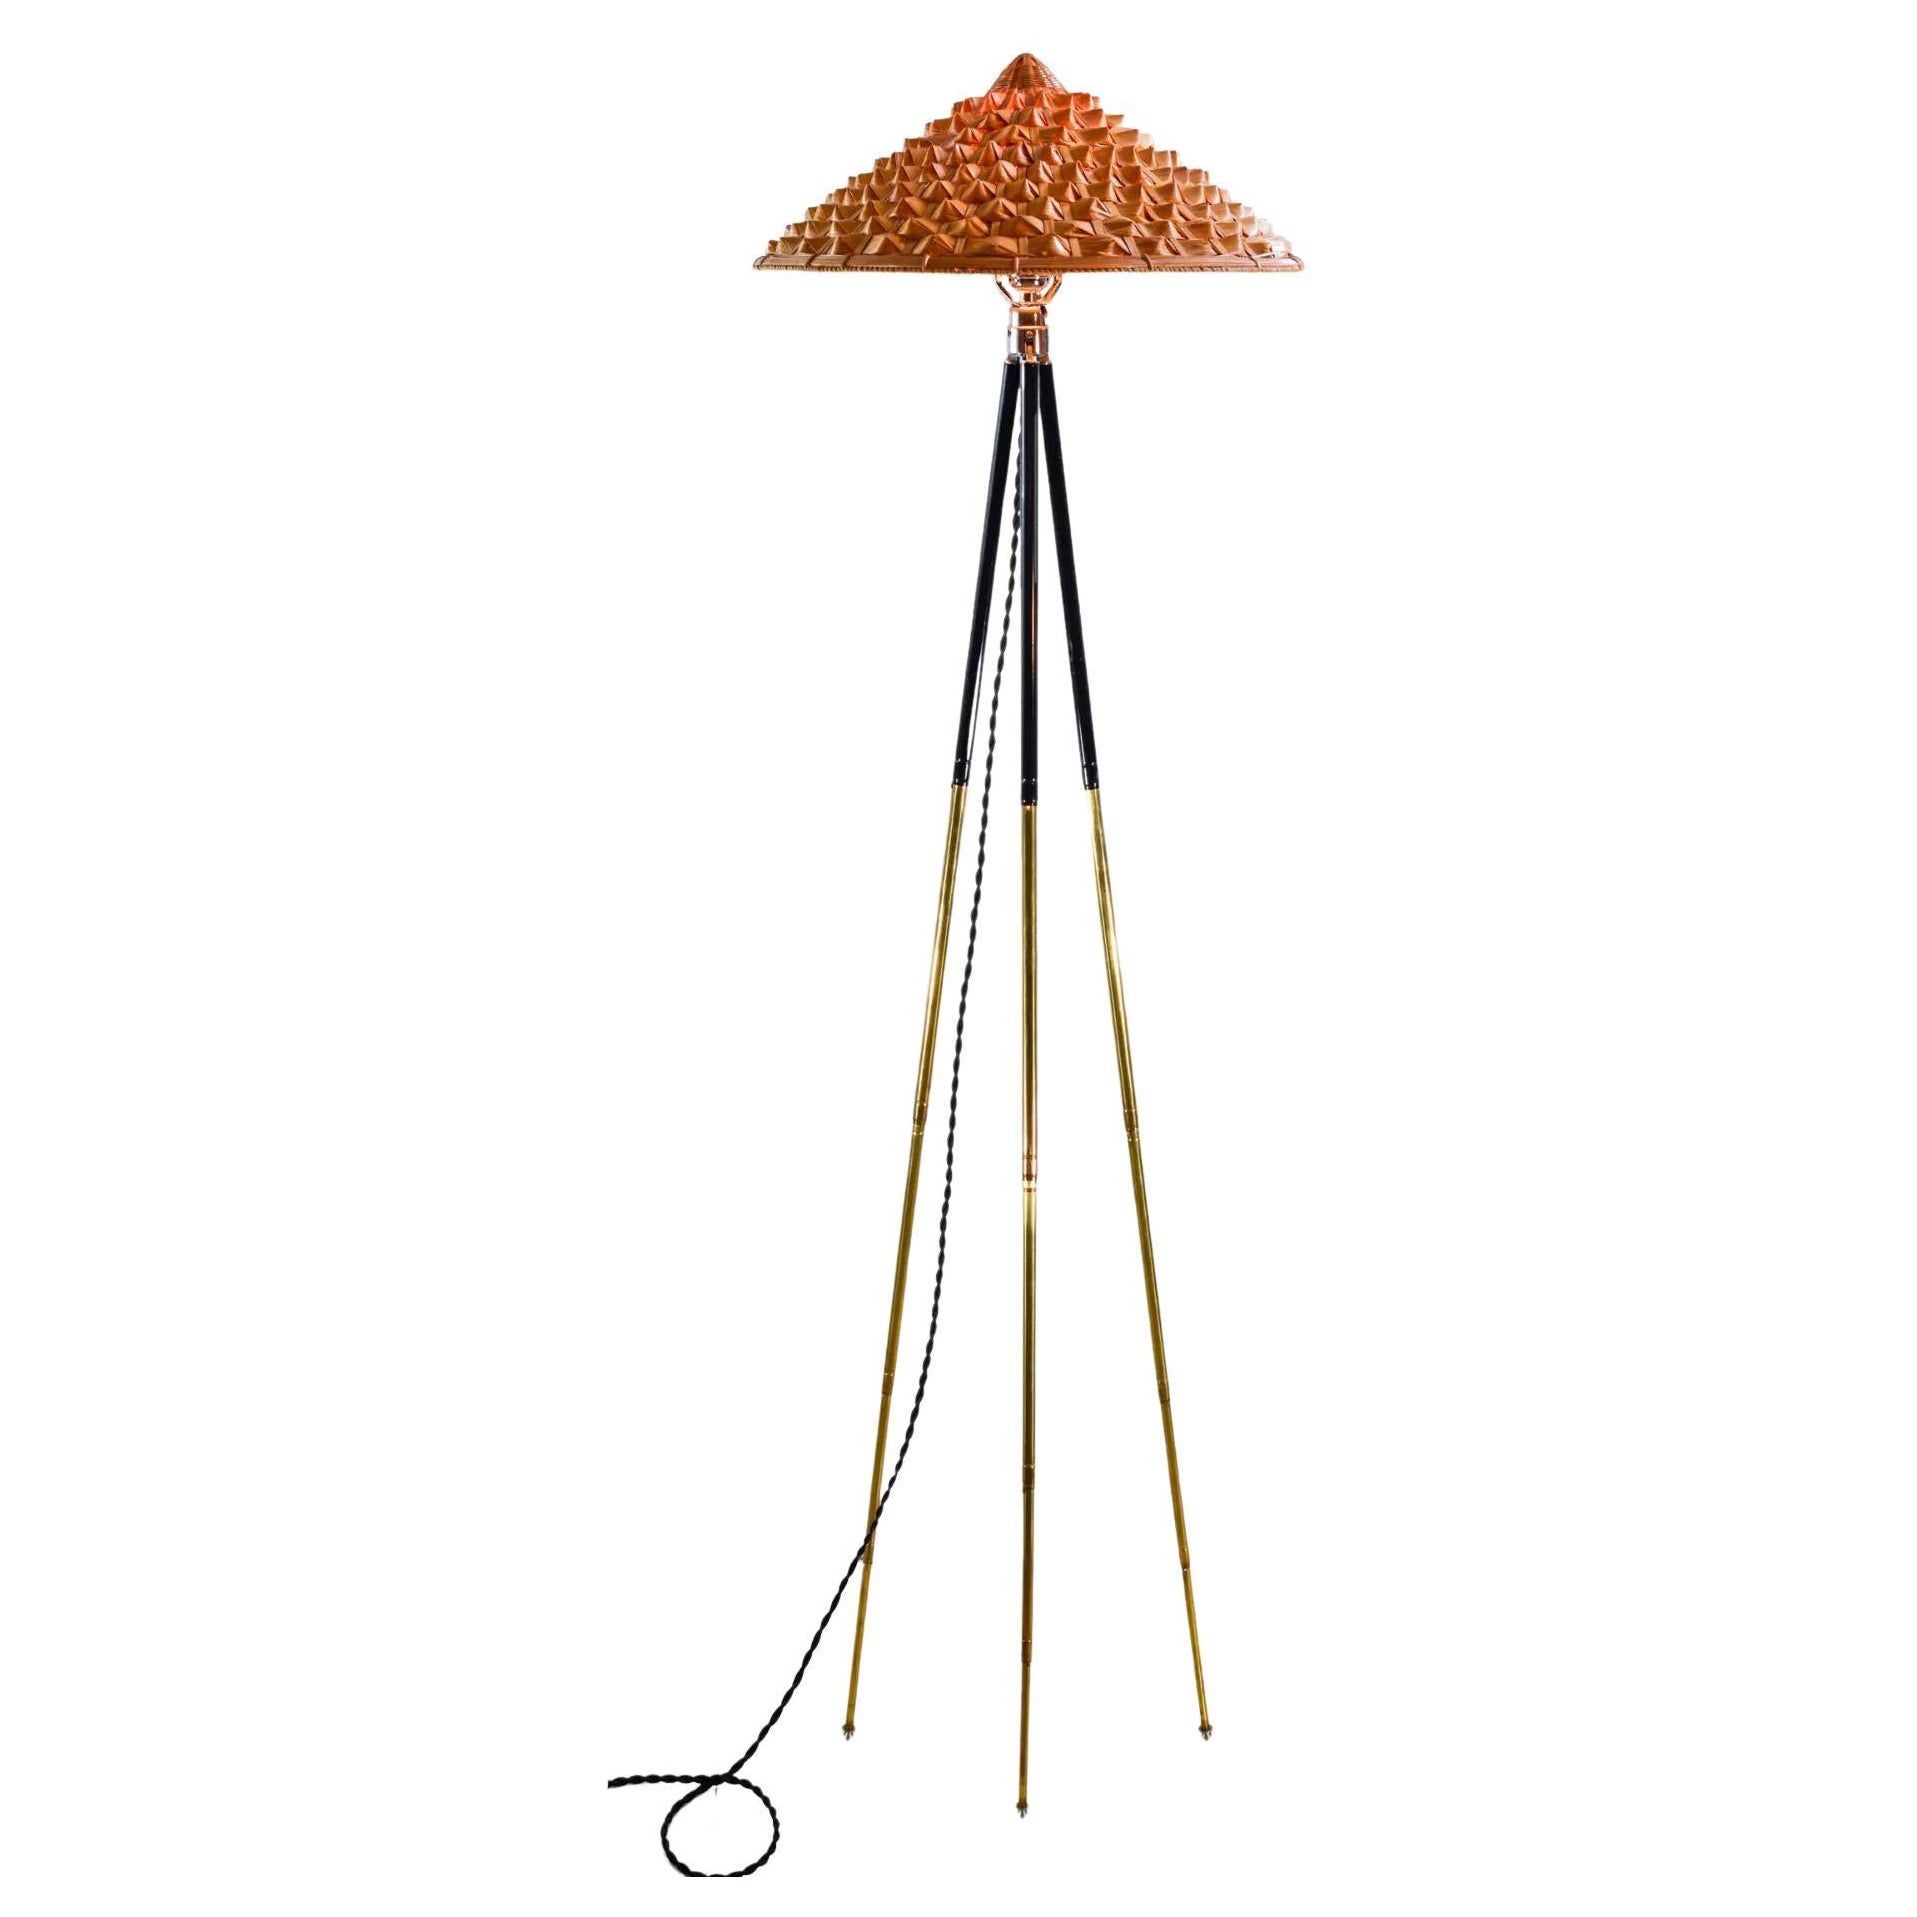 'Horst' Tripod Lamp in 2-Tone Brass with Woven Shade by Christopher Tennant